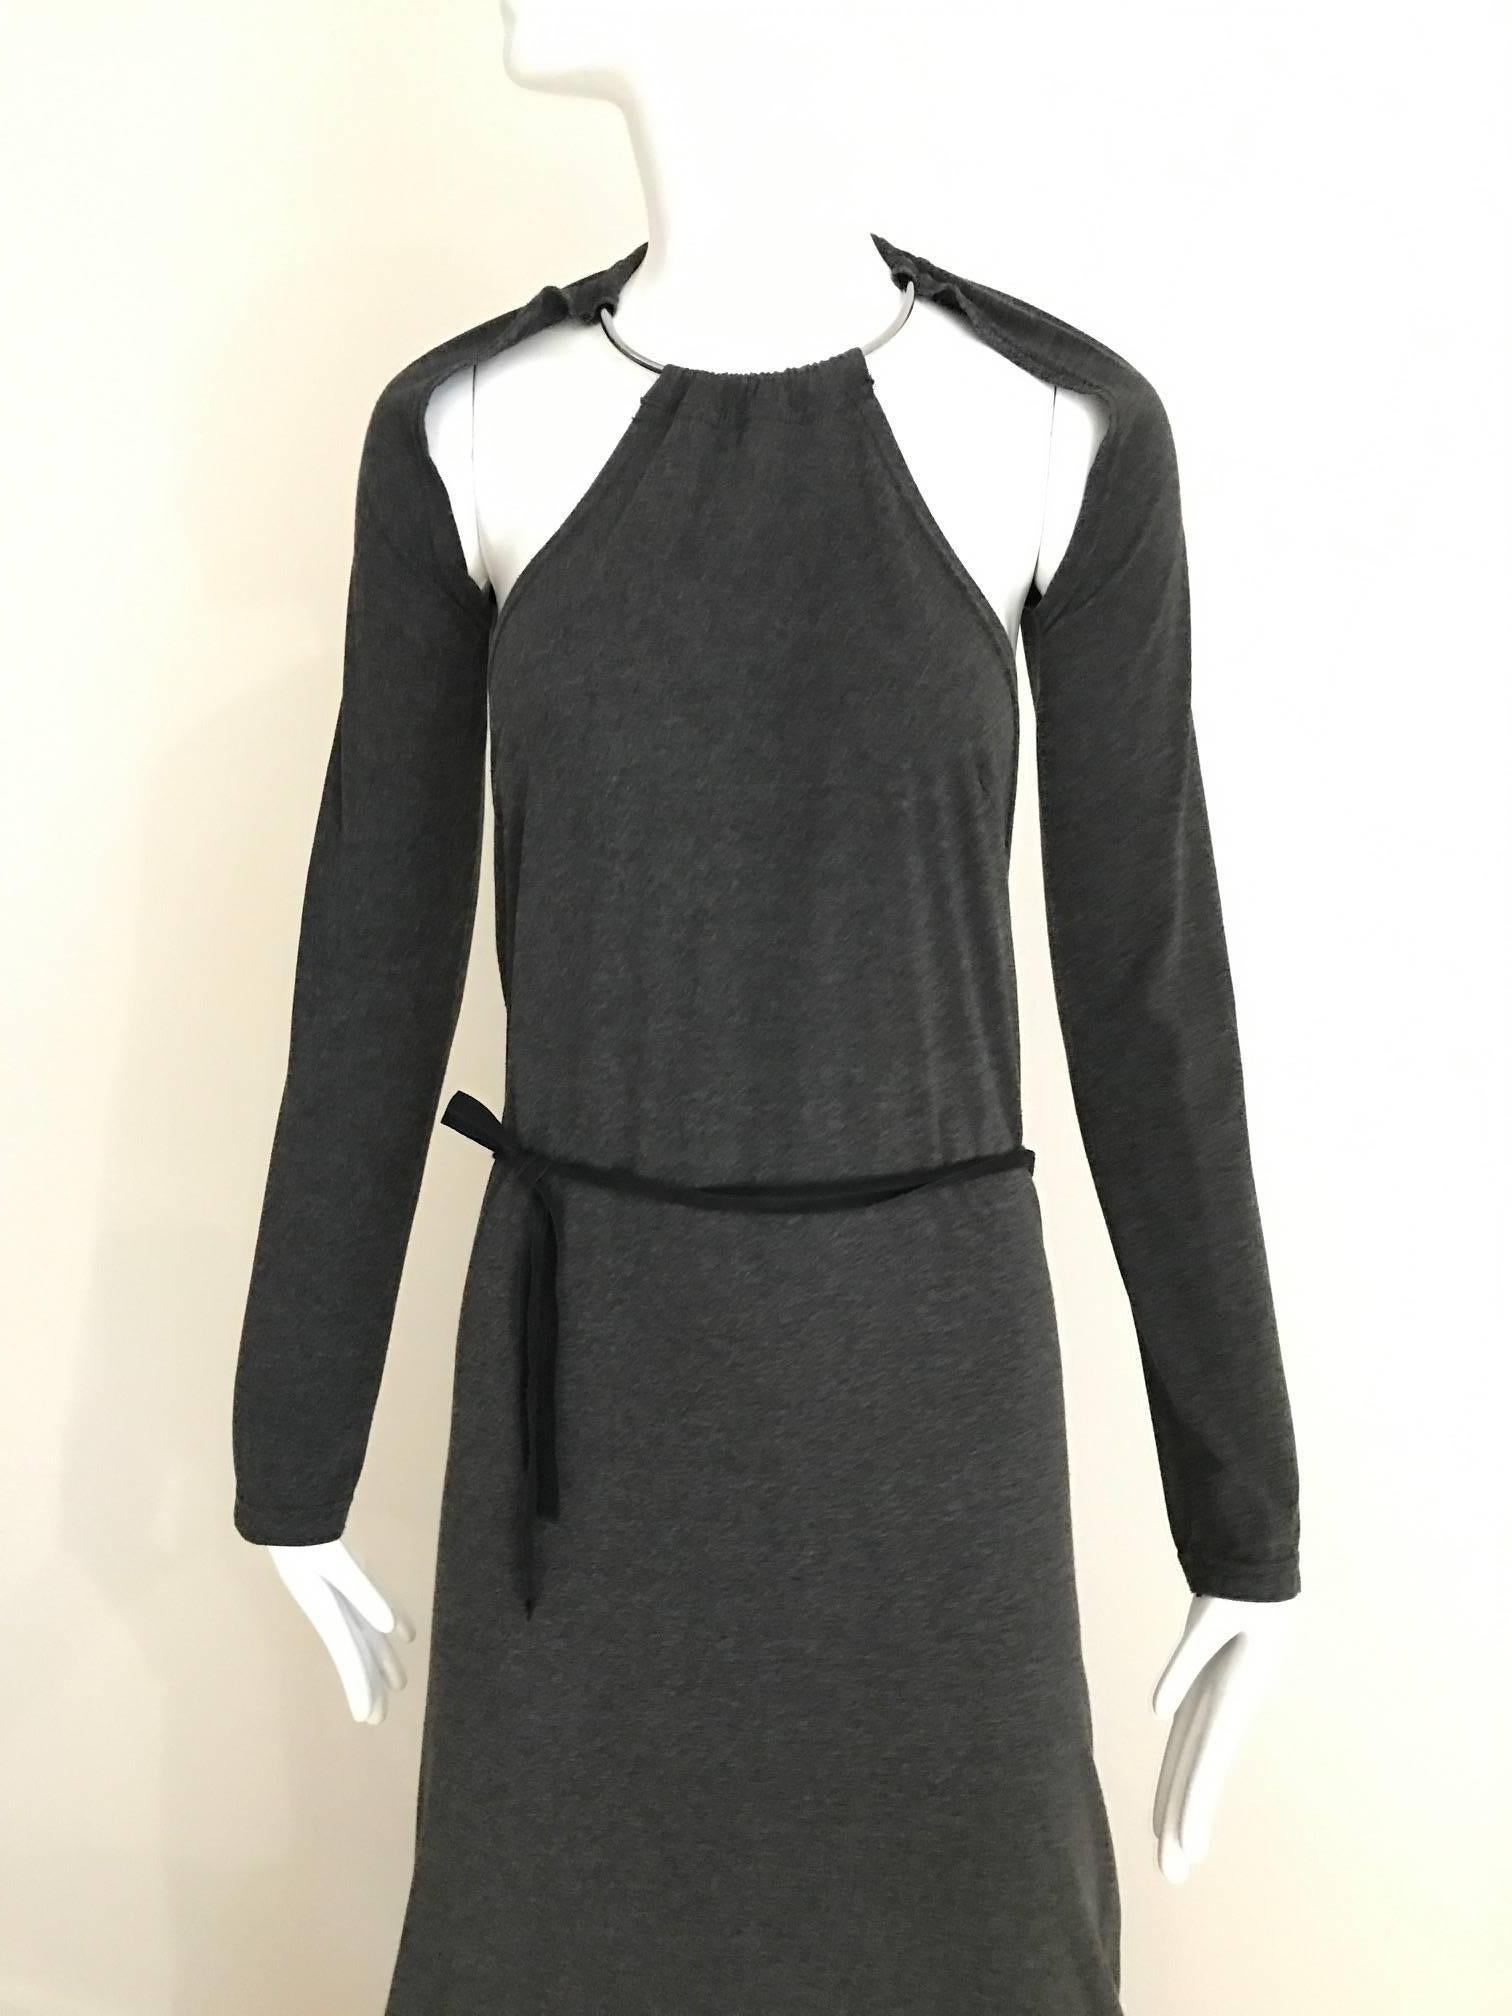 1990s Martin MARGIELA Grey Knit Halter Dress with detachable sleeve with Halter metal collar neckine and exposed back.
Fit size 4/6